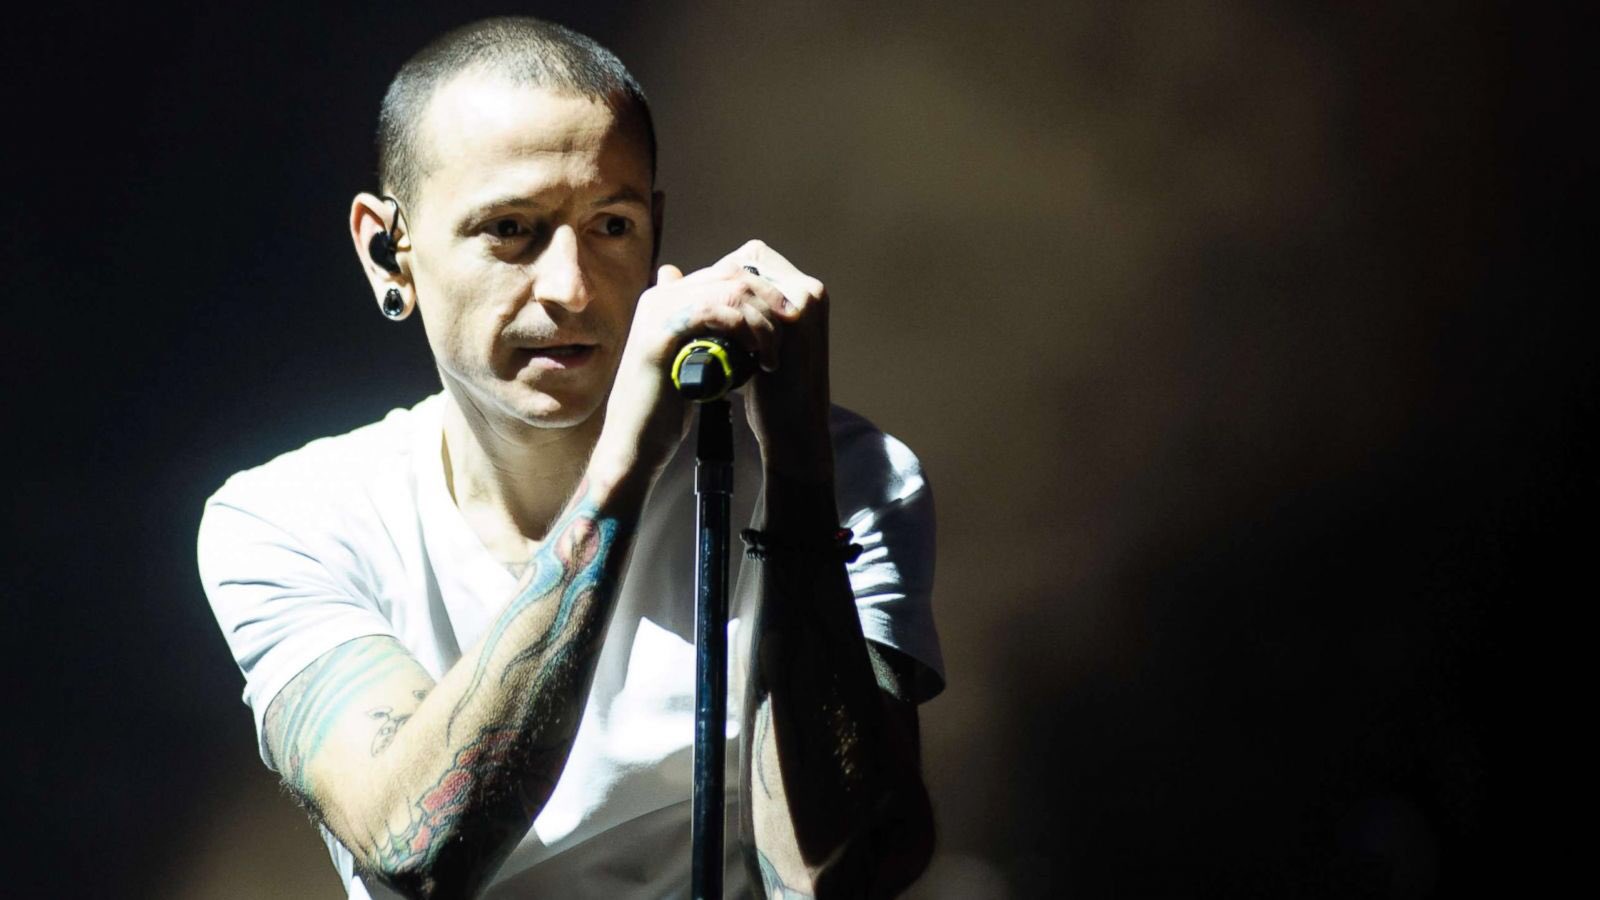 Happy bday to my mans chester bennington, love you so much  